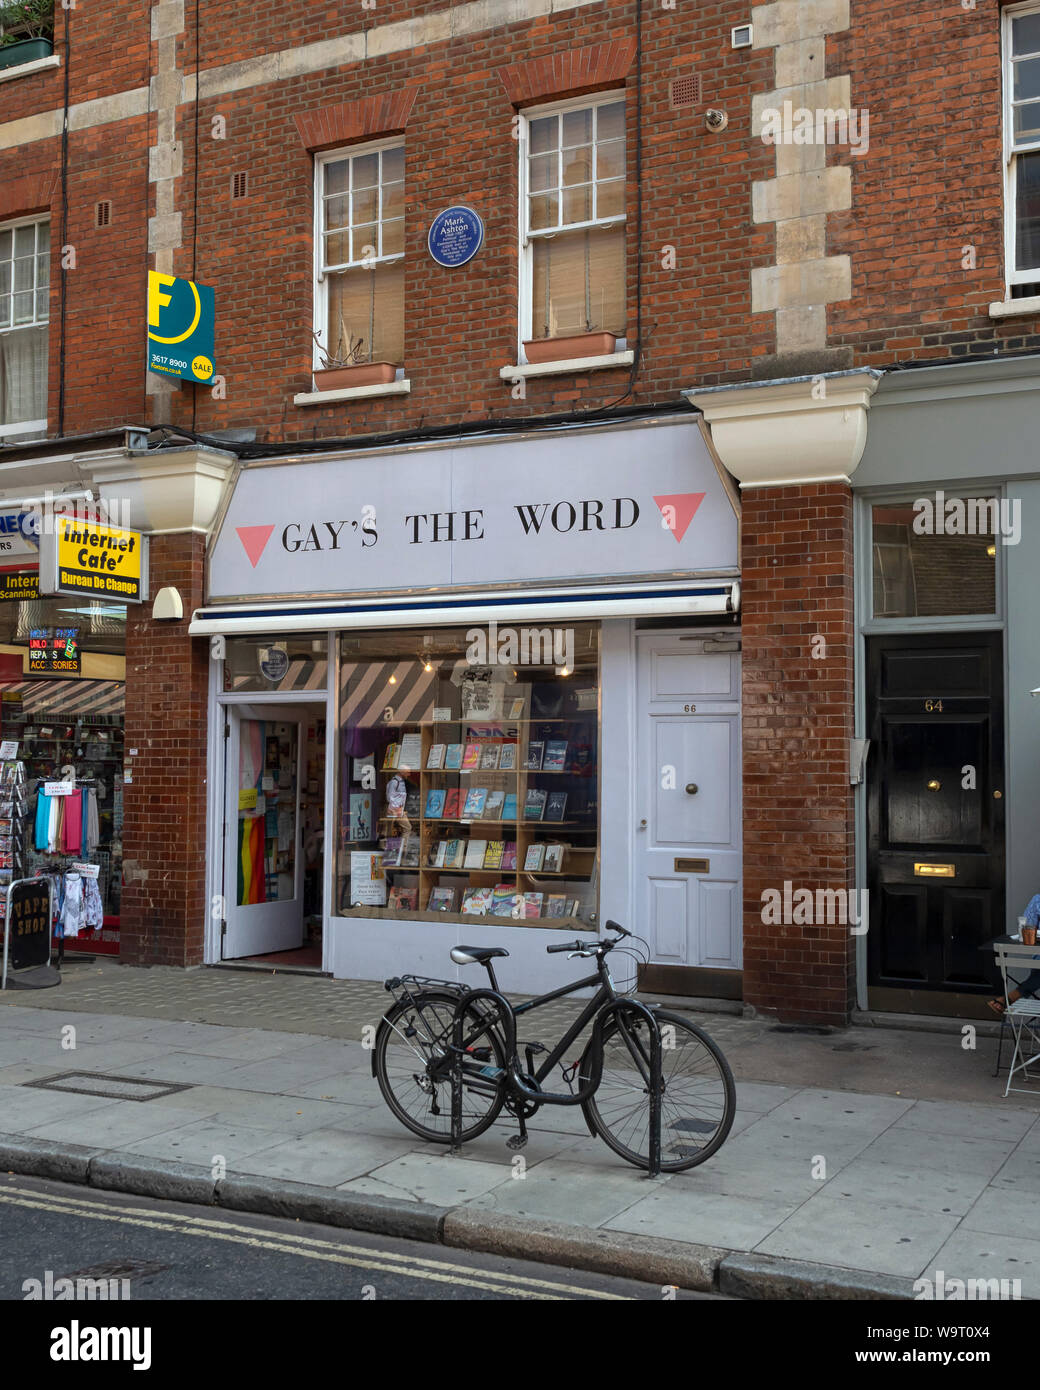 LONDON, UK - JULY 26, 2018:  Exterior view of Gays The Word - a bookshop selling LGBT books in Marchmont Street, Camden Stock Photo